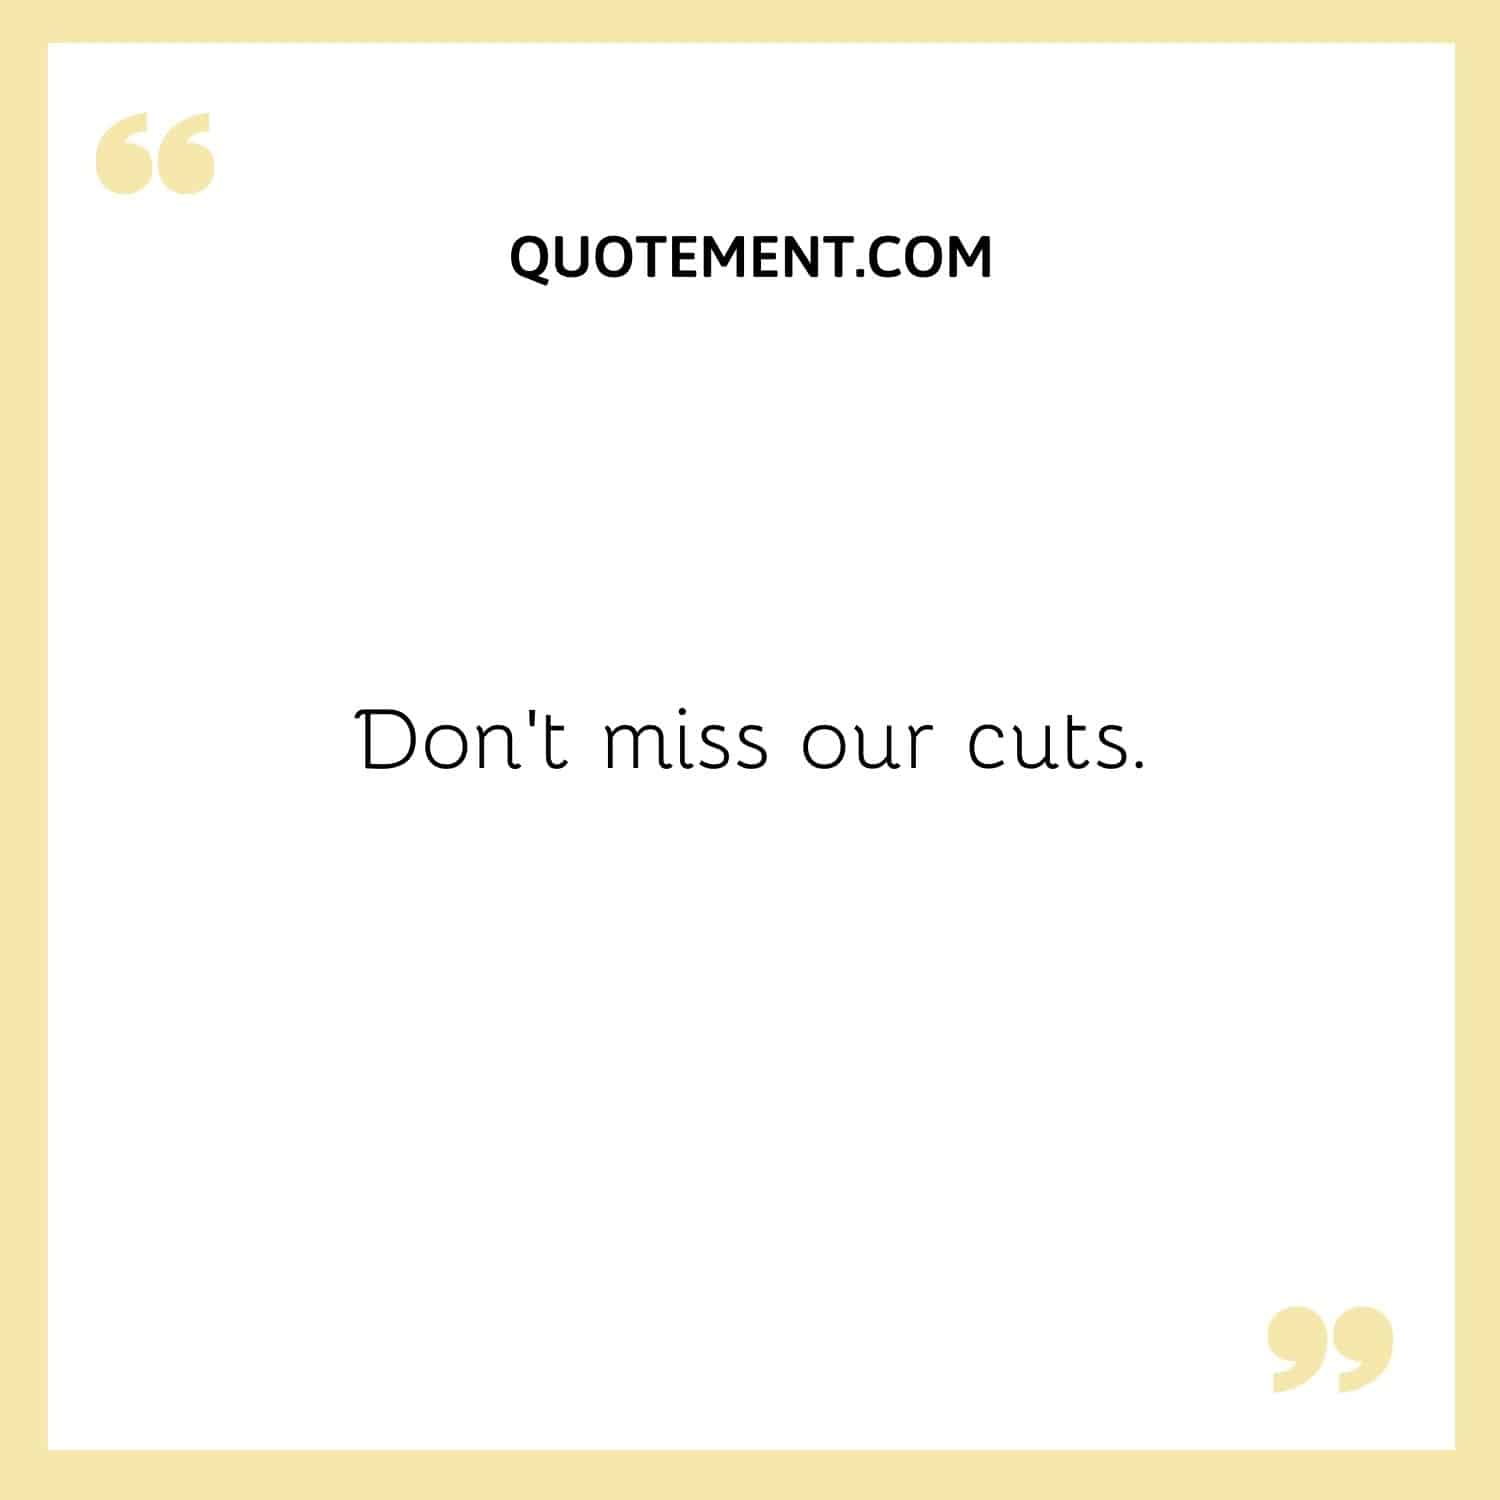 Don't miss our cuts.